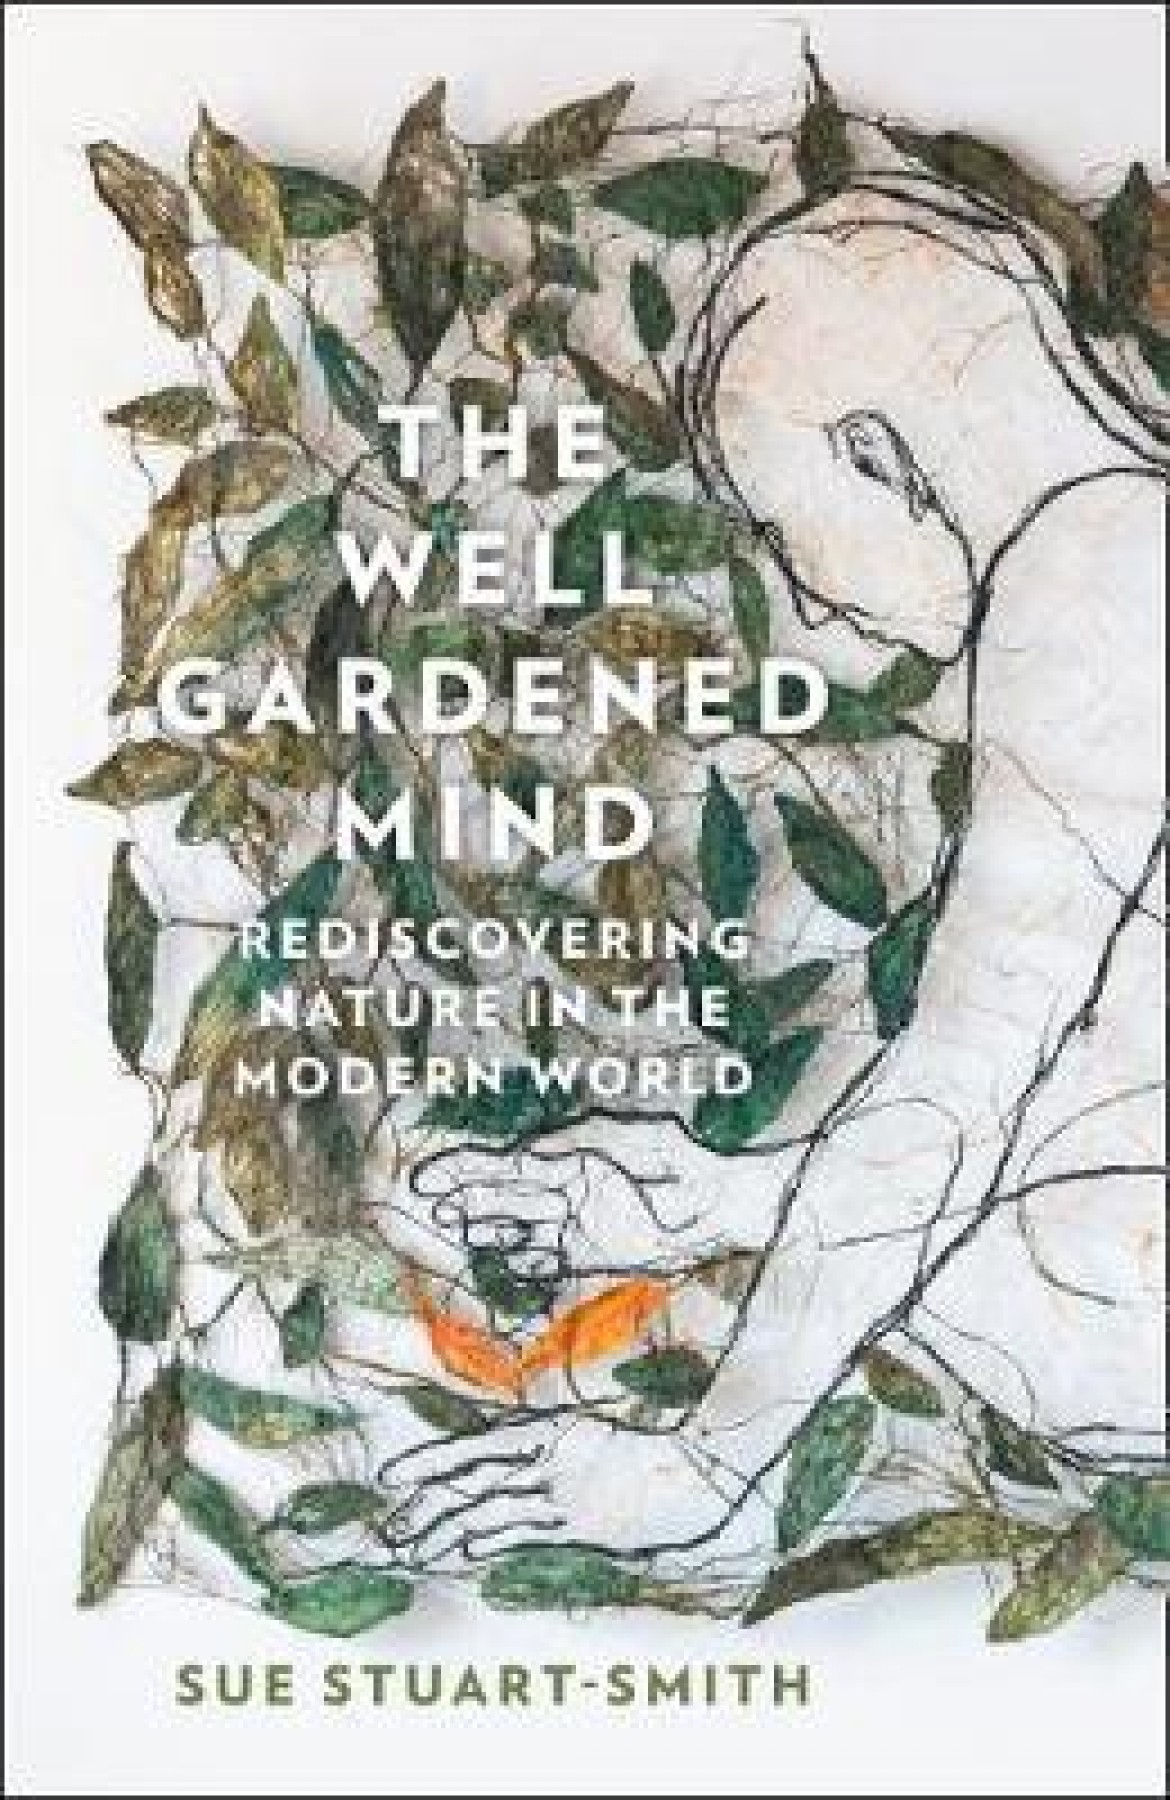 The well gardened mind: Rediscovering nature in the modern world